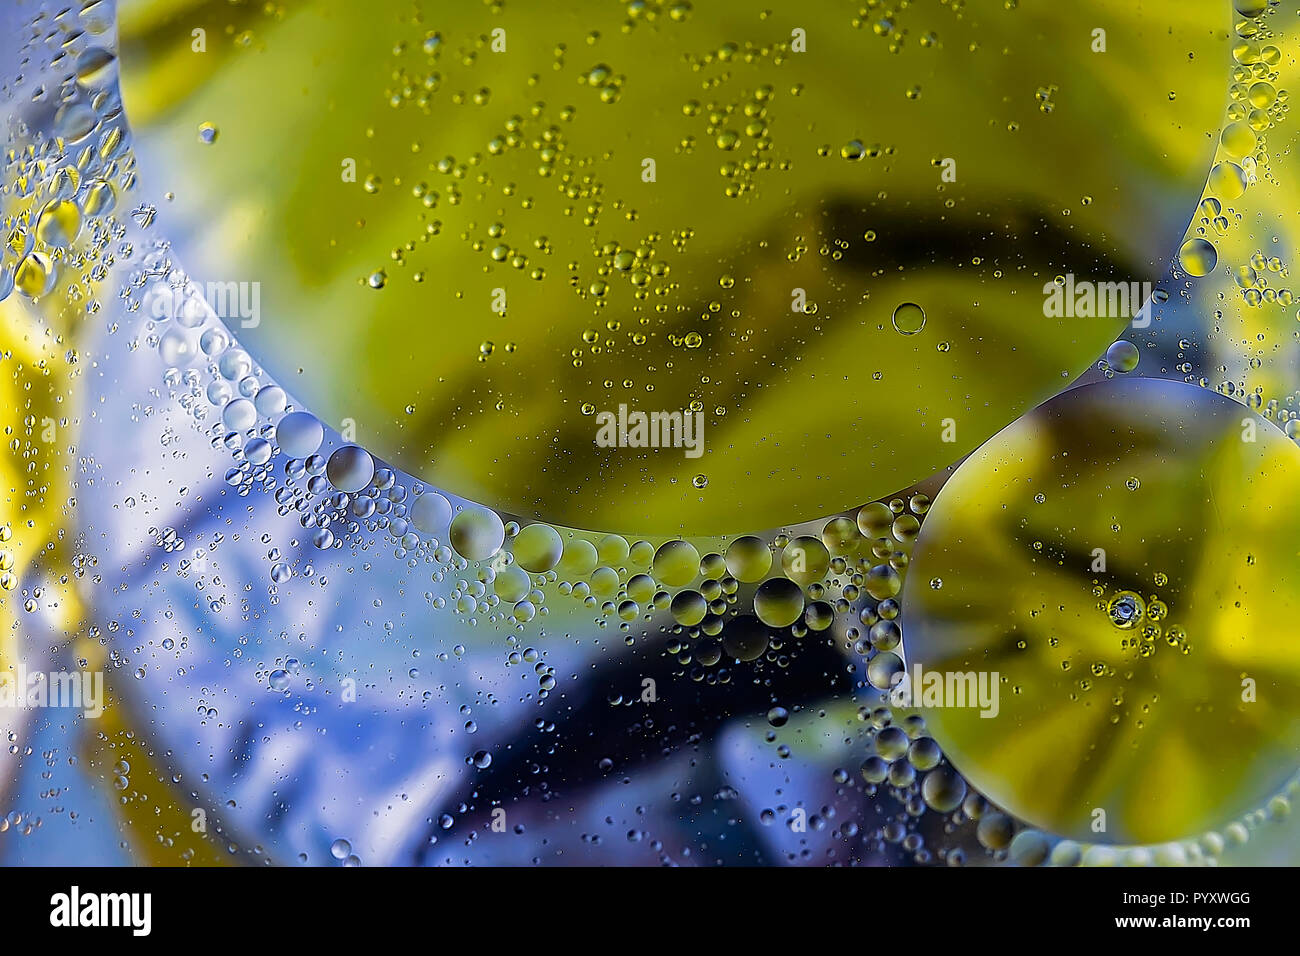 Oil In Water. Abstract Molecular Structure. Macro photography .Extreme Close-up. Stock Image. Stock Photo